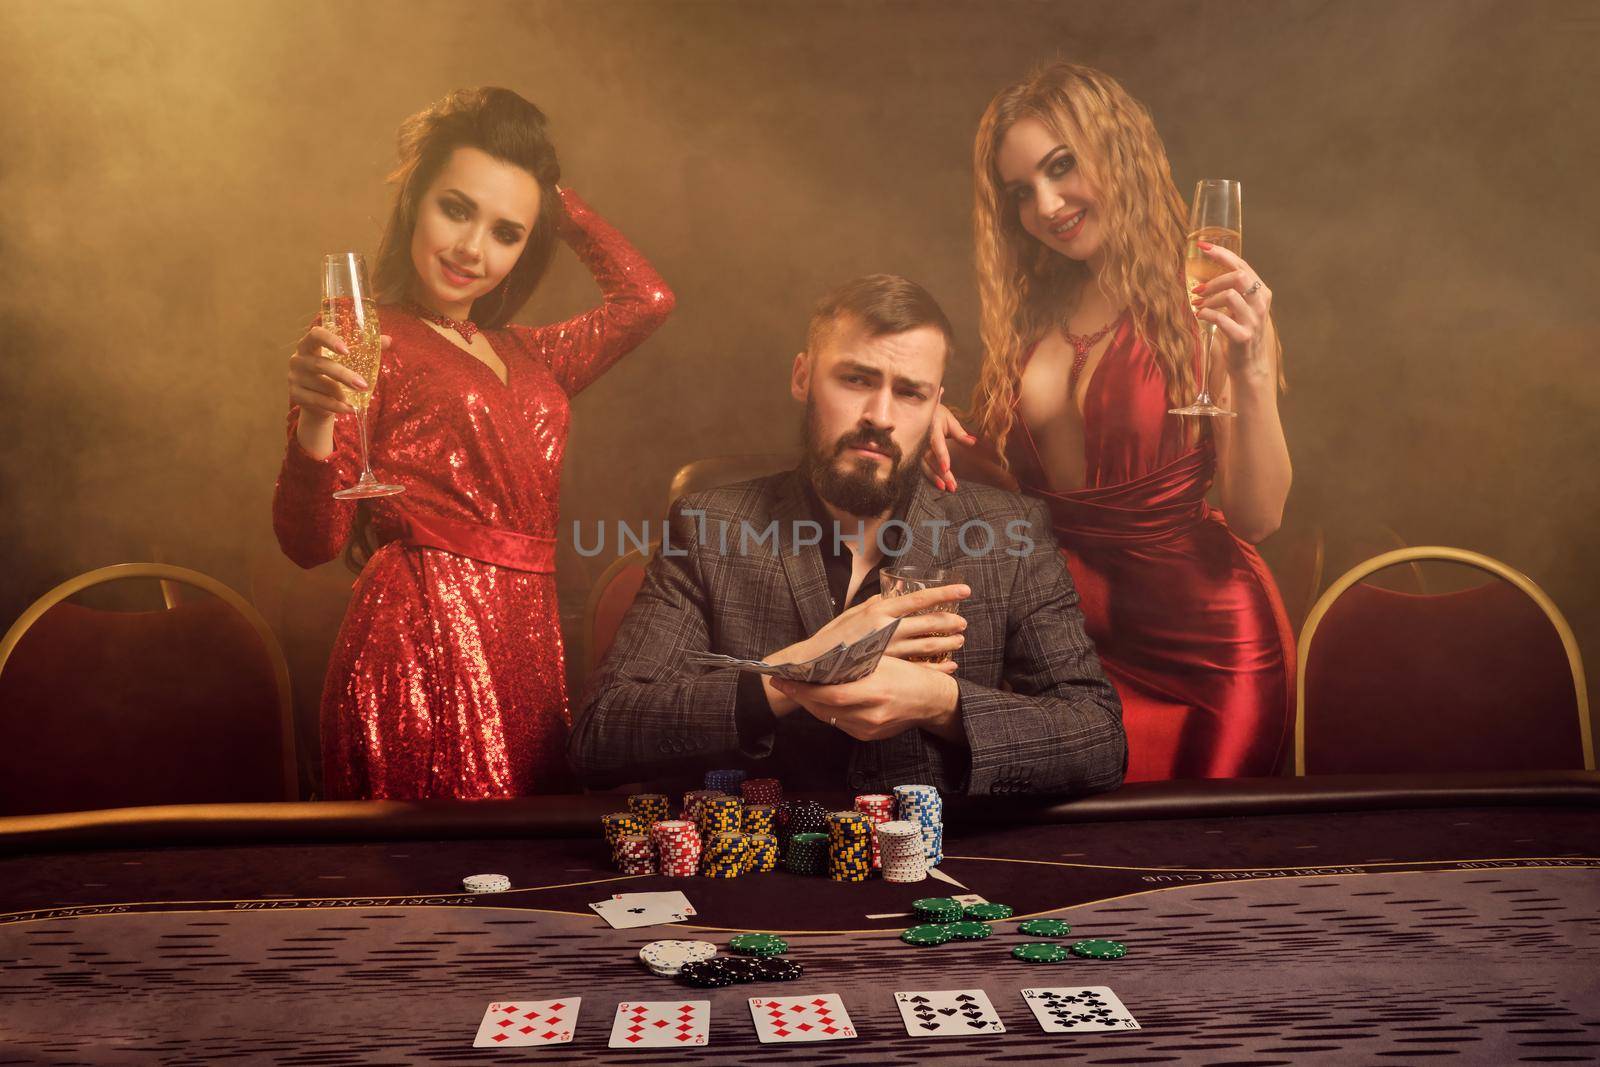 Two attractive ladies and good-looking fellow are playing poker at casino. They are holding their cash winning, smiling and having a good time while posing at the table against a yellow backlight on smoke background. Cards, chips, money, gambling, entertainment concept.